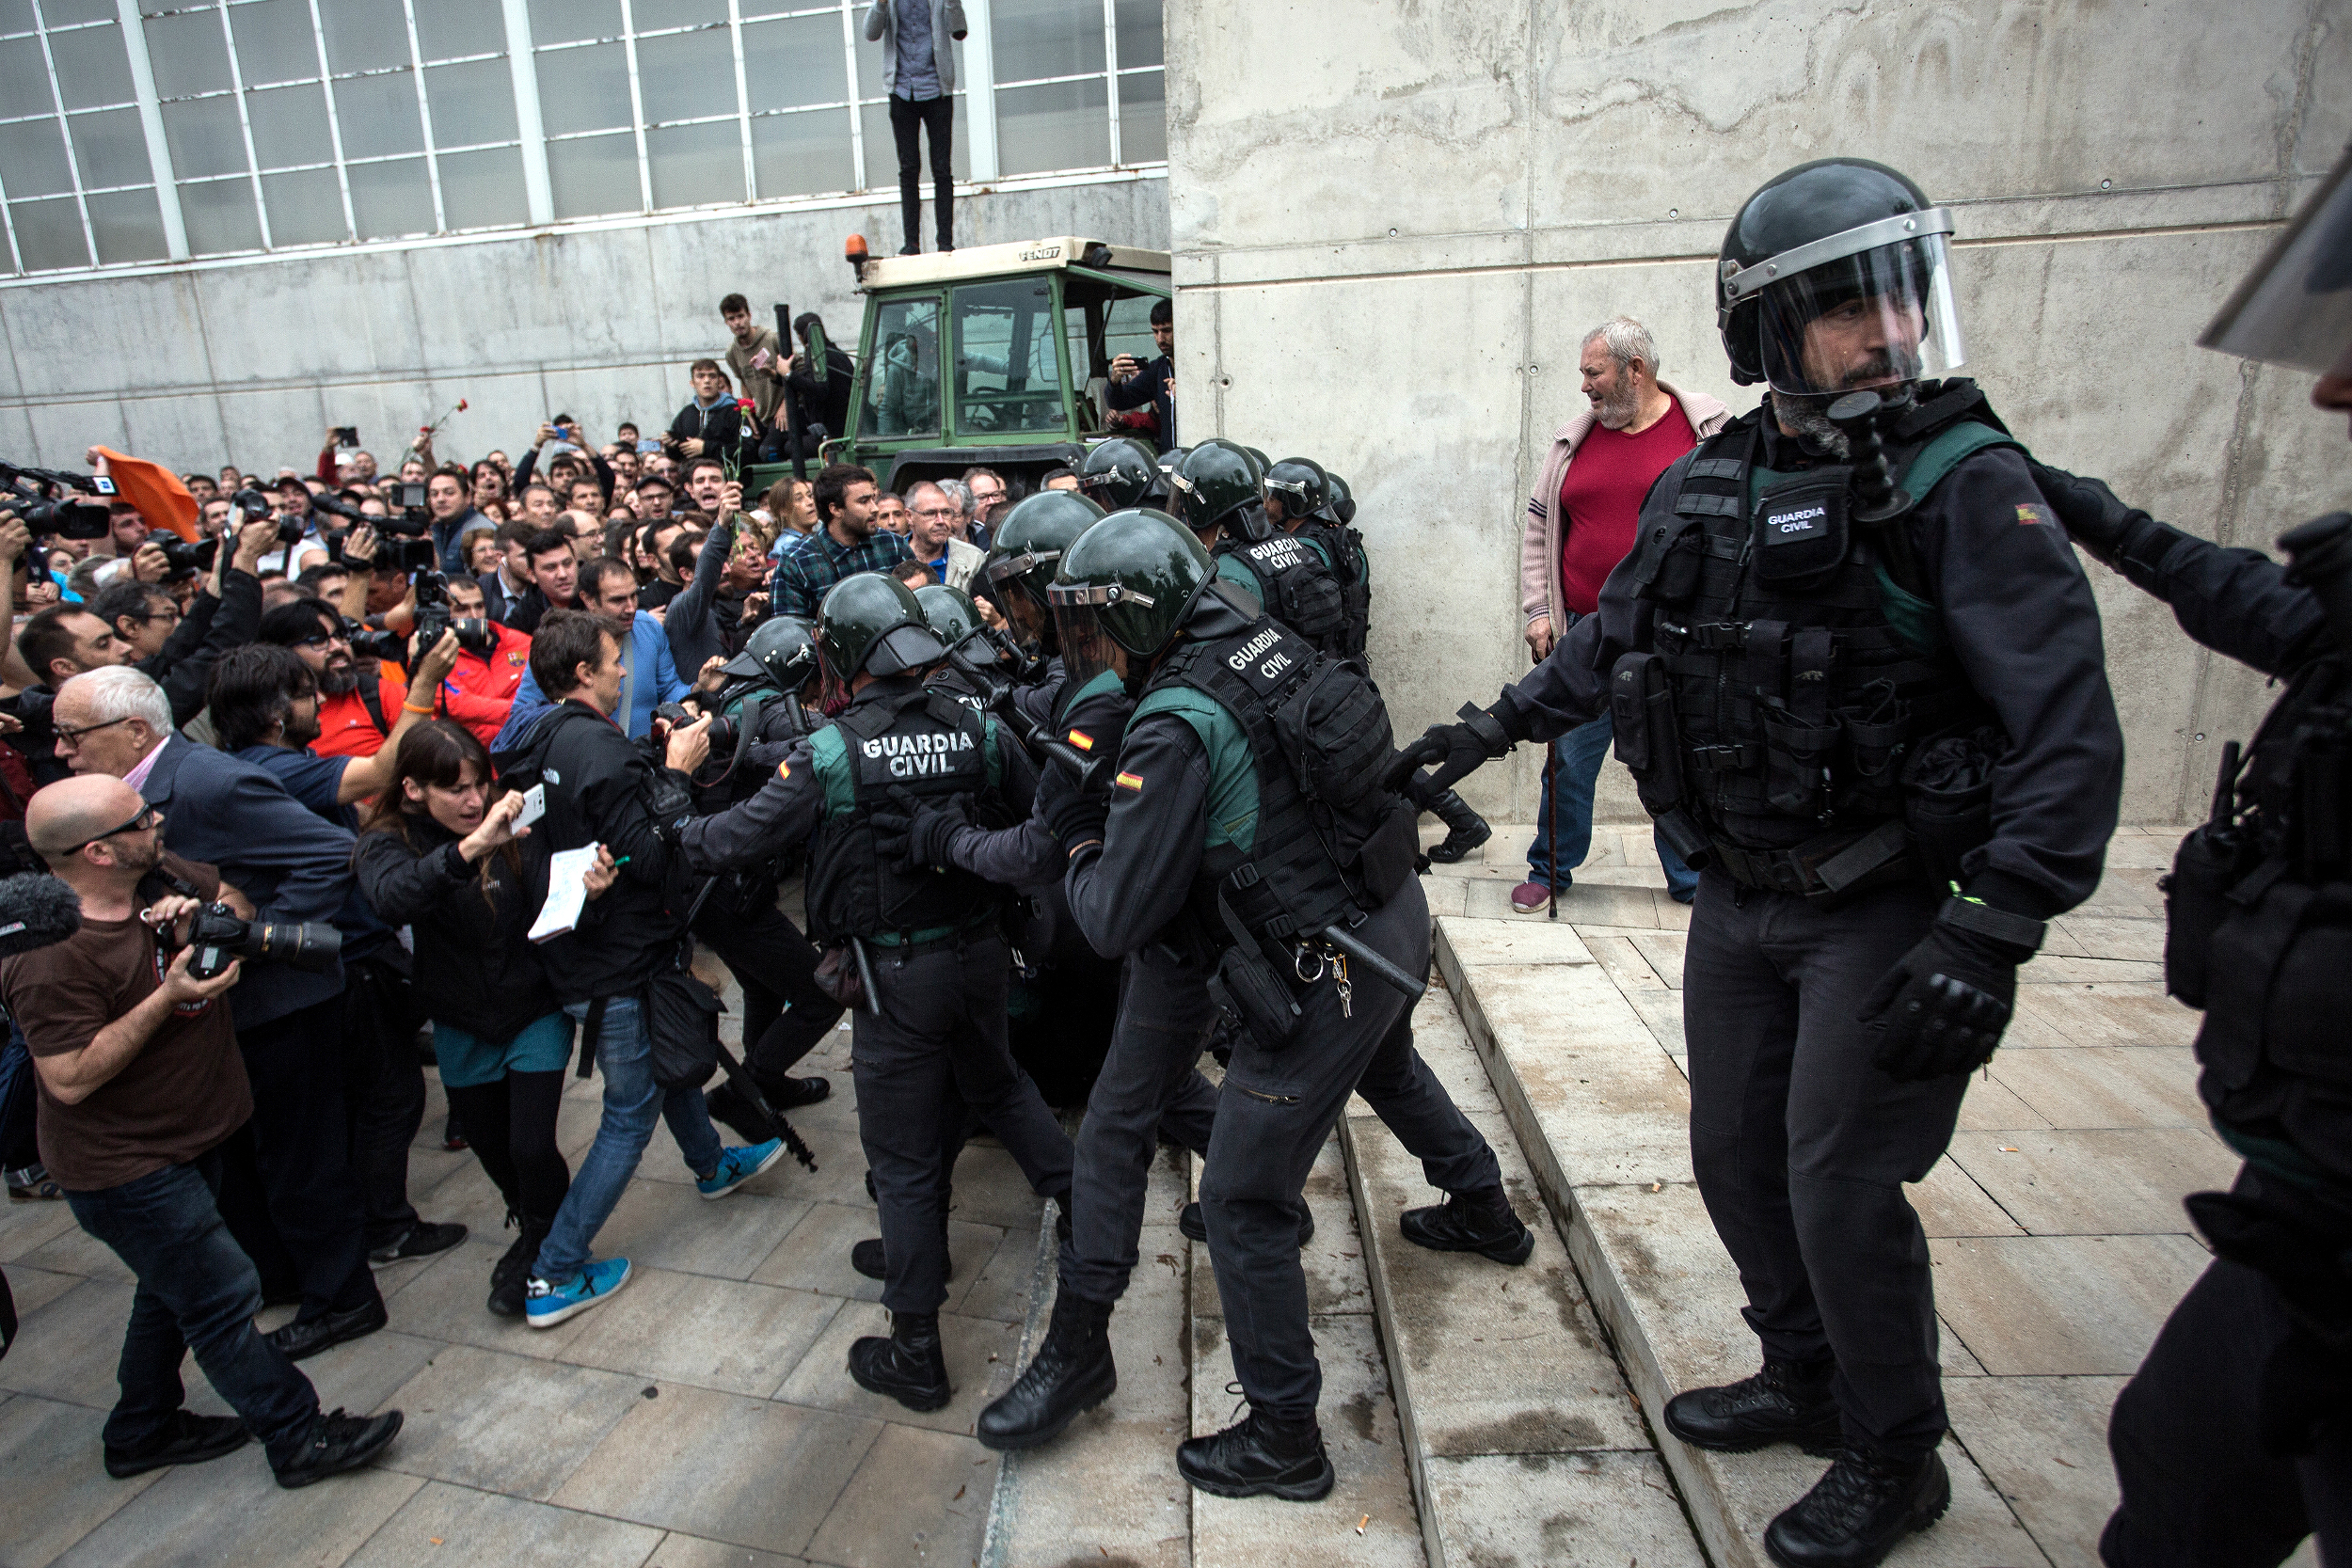 Guardia Civil agents confront people outside a polling station in Catalonia (by ACN)